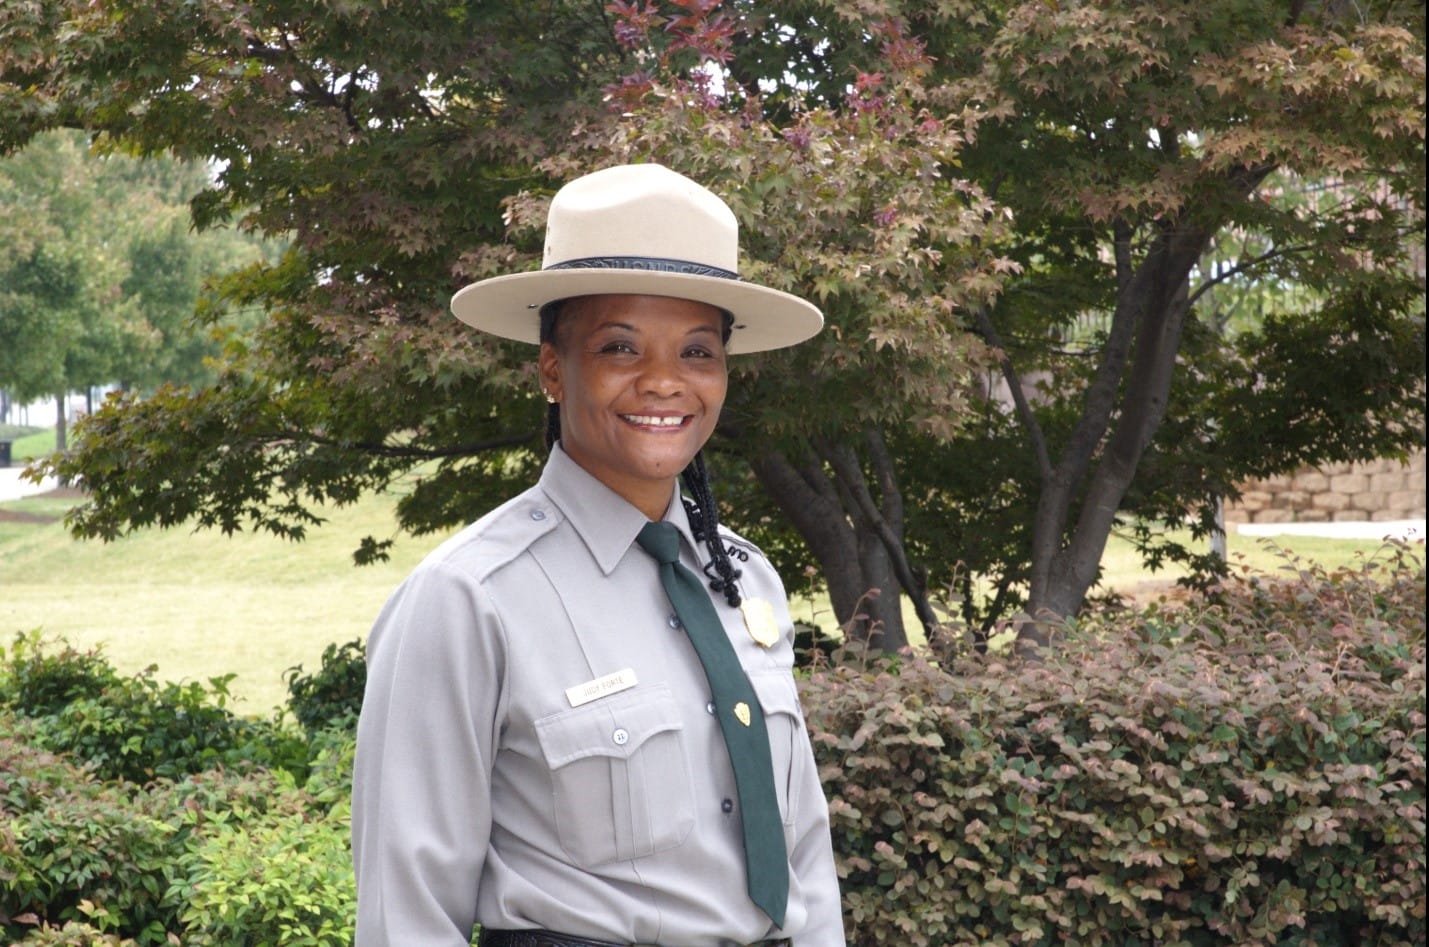 A woman wearing a hat and uniform standing in front of bushes.